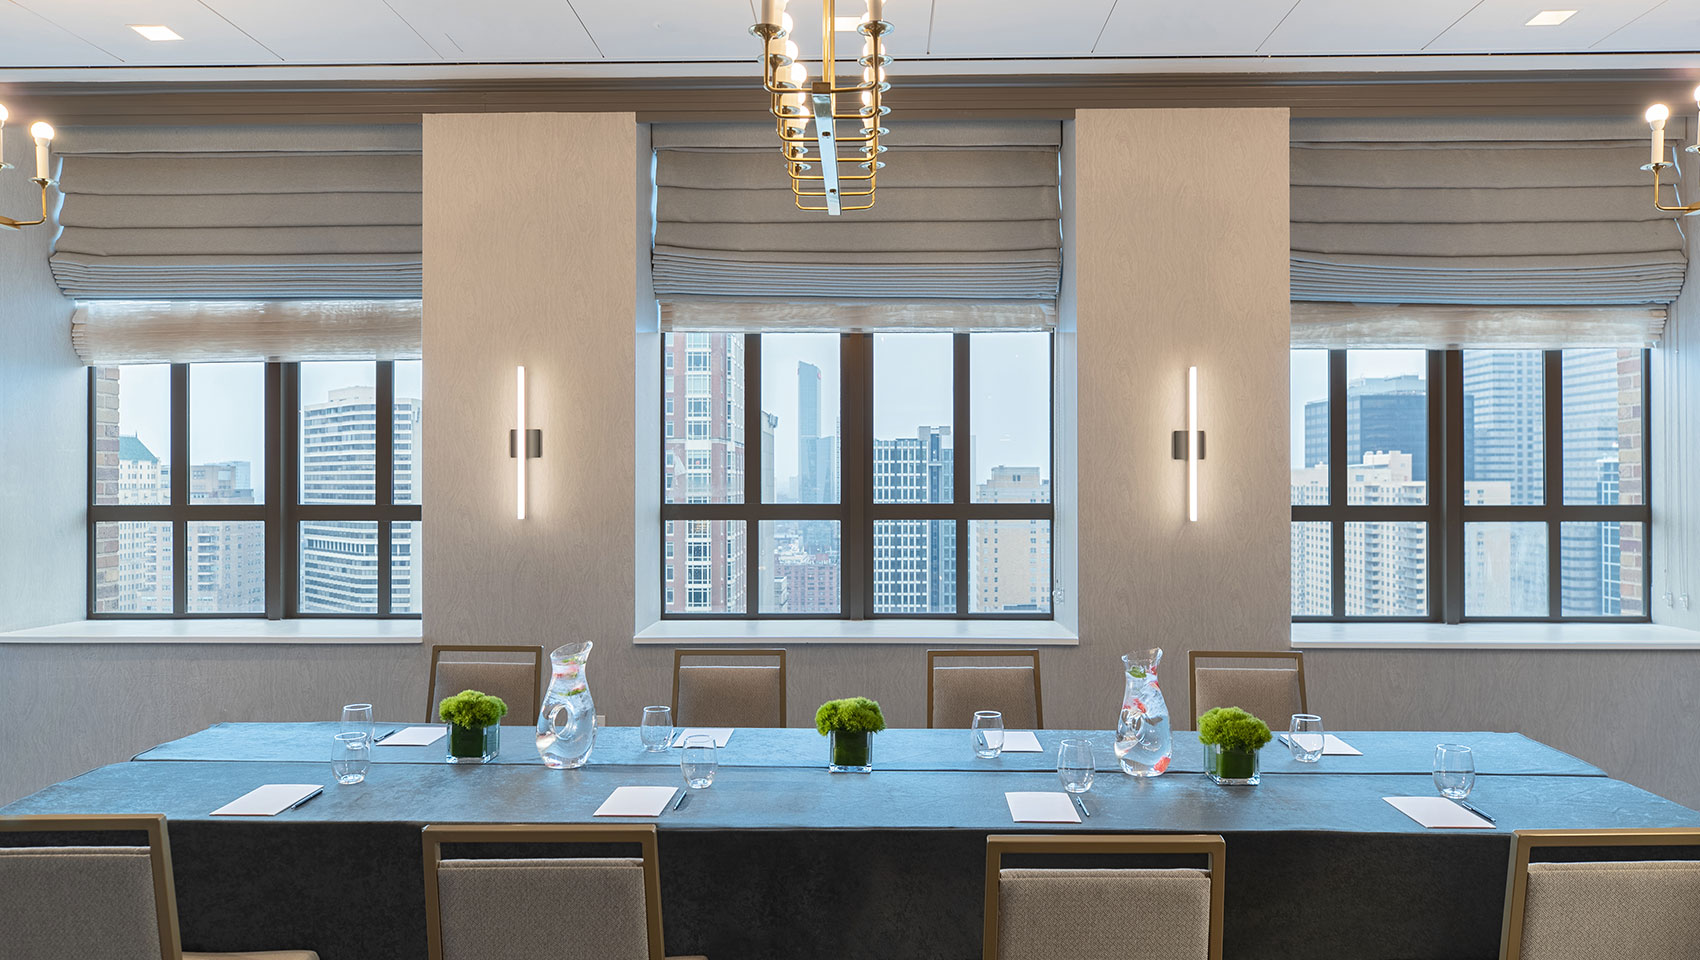 Conference Setup in Abe room located in Kimpton Hotel Palomar Philadelphia showing to long tables with notepads on top surrounded by chairs and large windows on the back wall that overlook city views